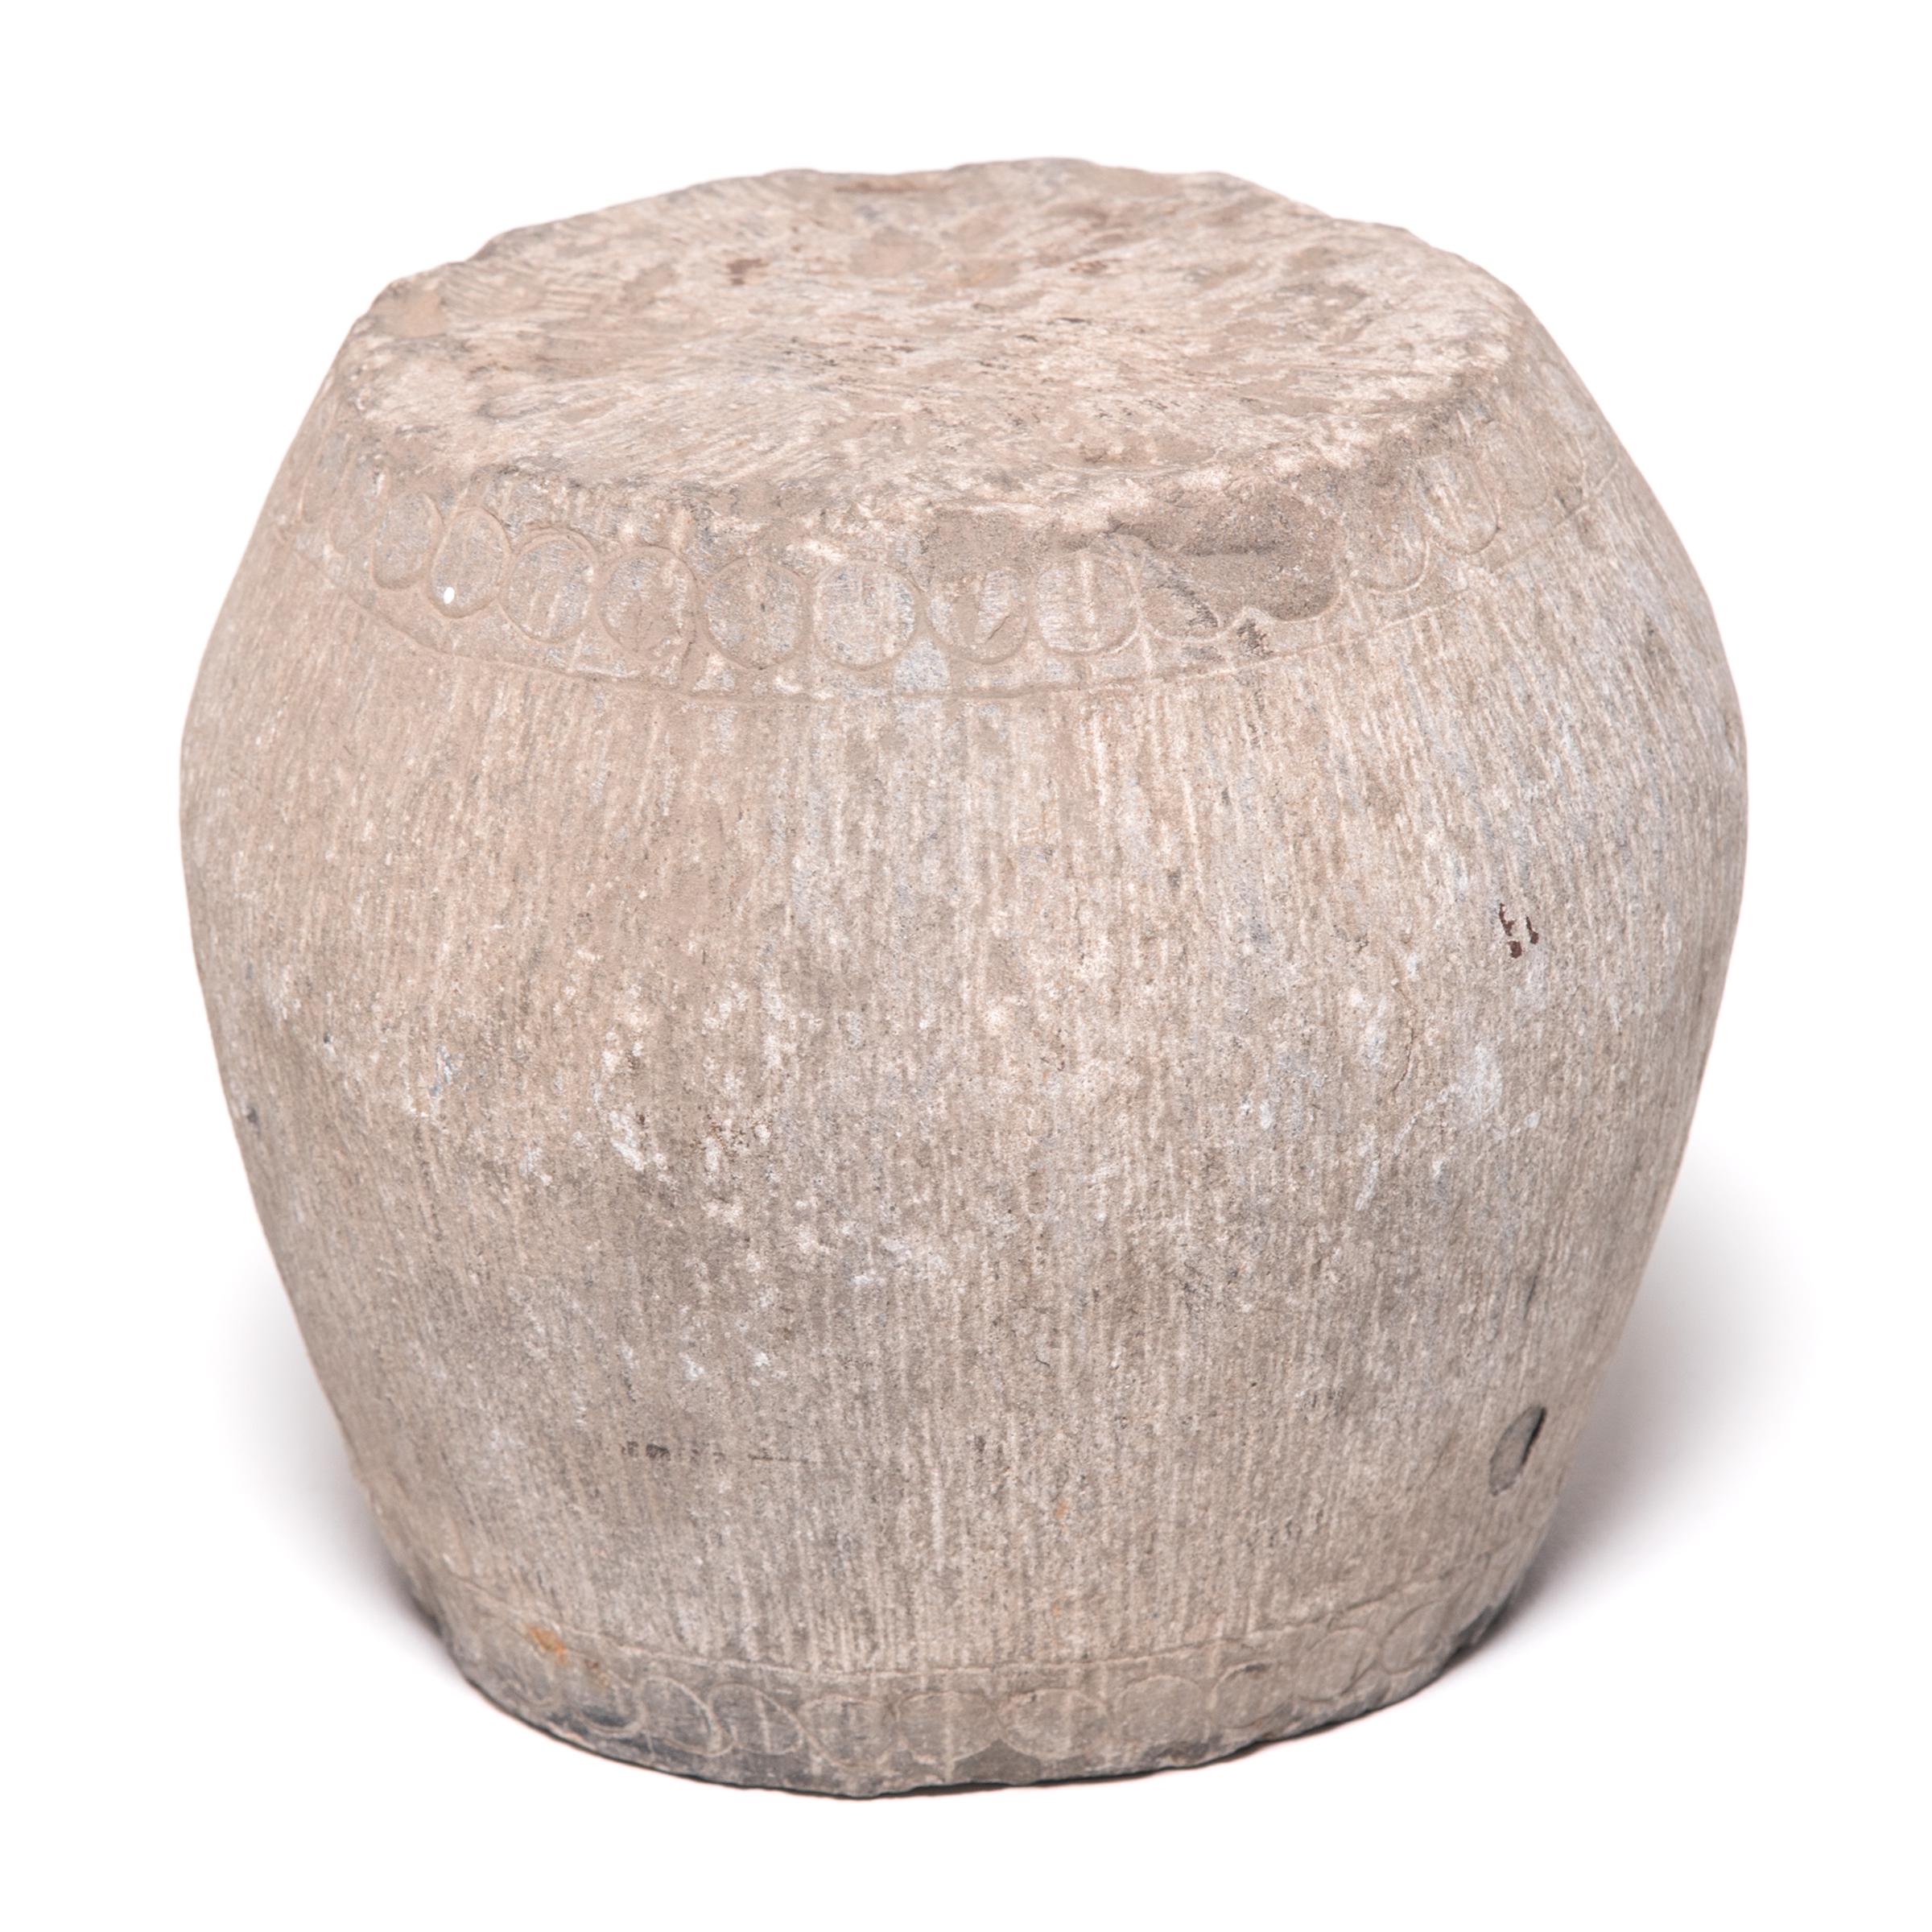 Look closely and you can just make out the hand-carved details that once made this small stone stool resemble a drum. A ring of circles along the top and bottom imitates bosshead nails used to stretch a skin on an actual drum, and thin vertical